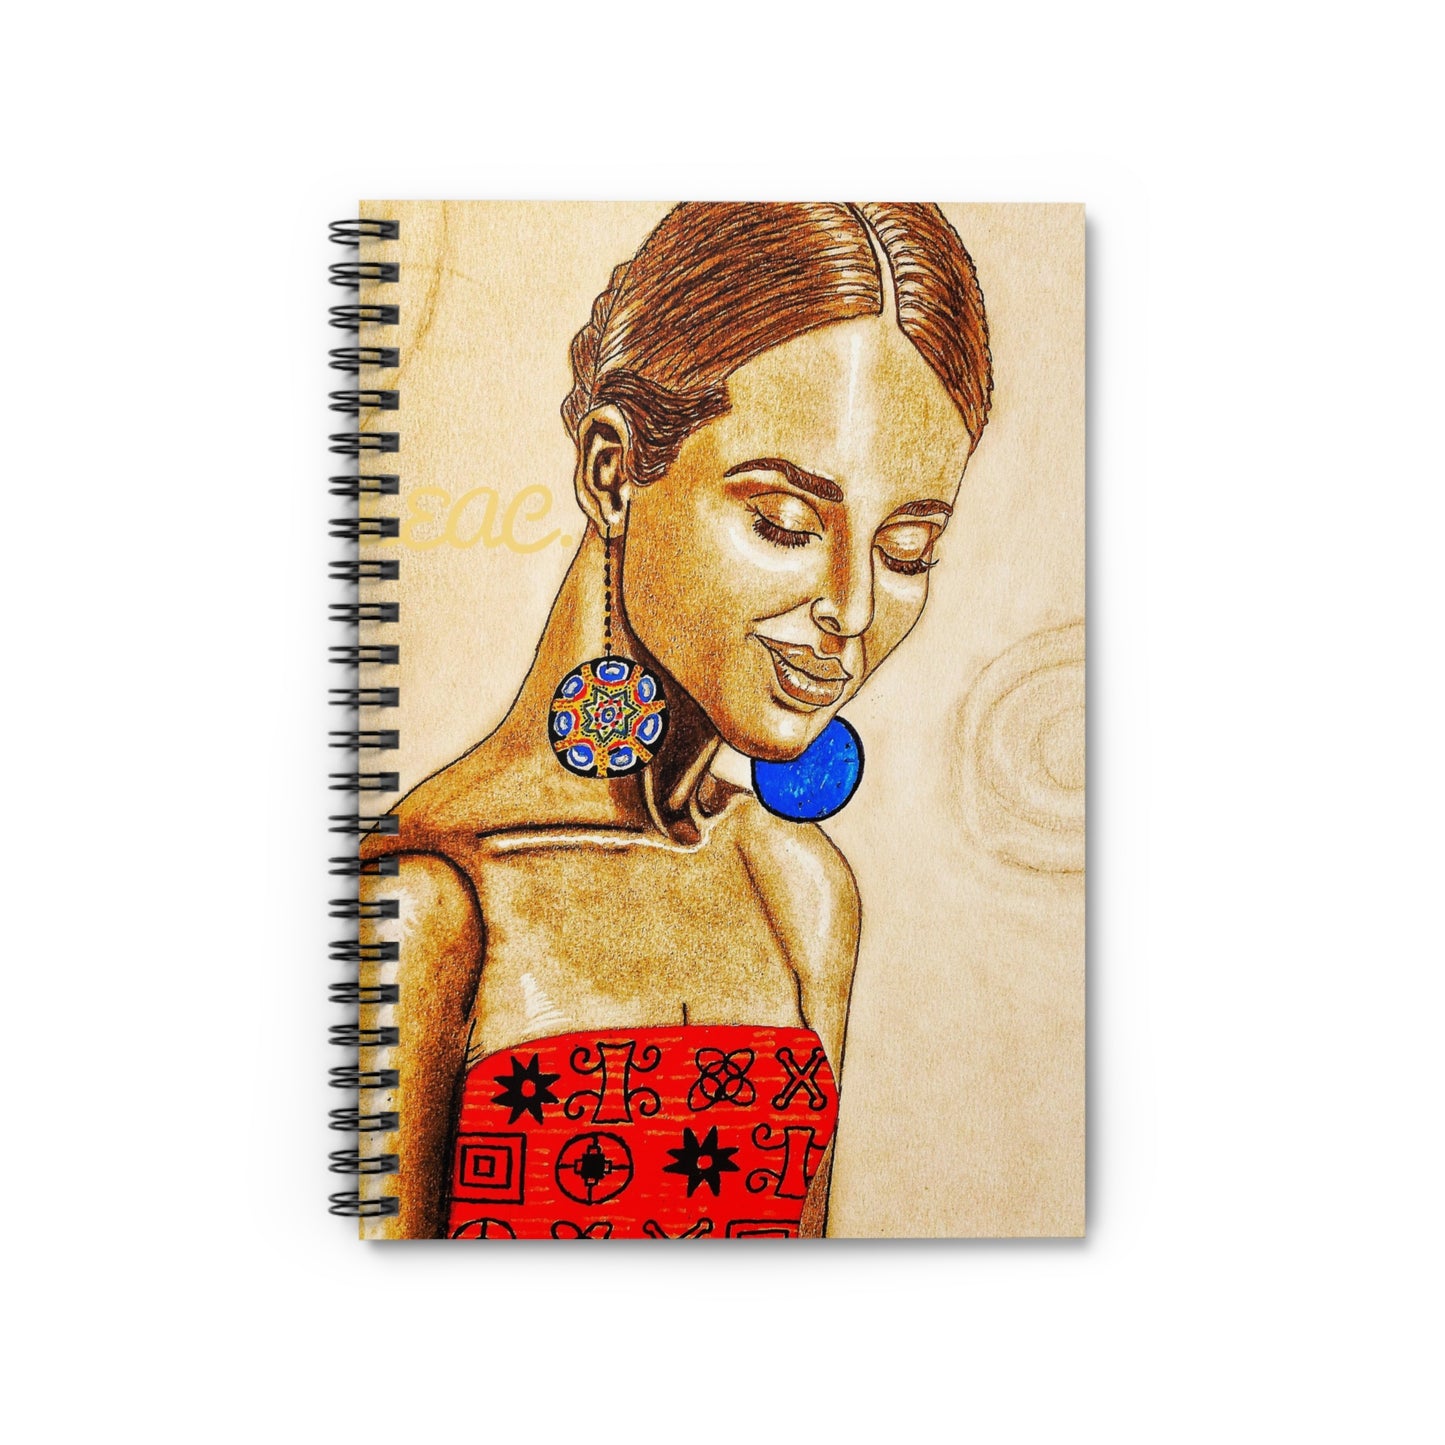 Elegant Drover Yellow Spiral Notebook - Ruled Line